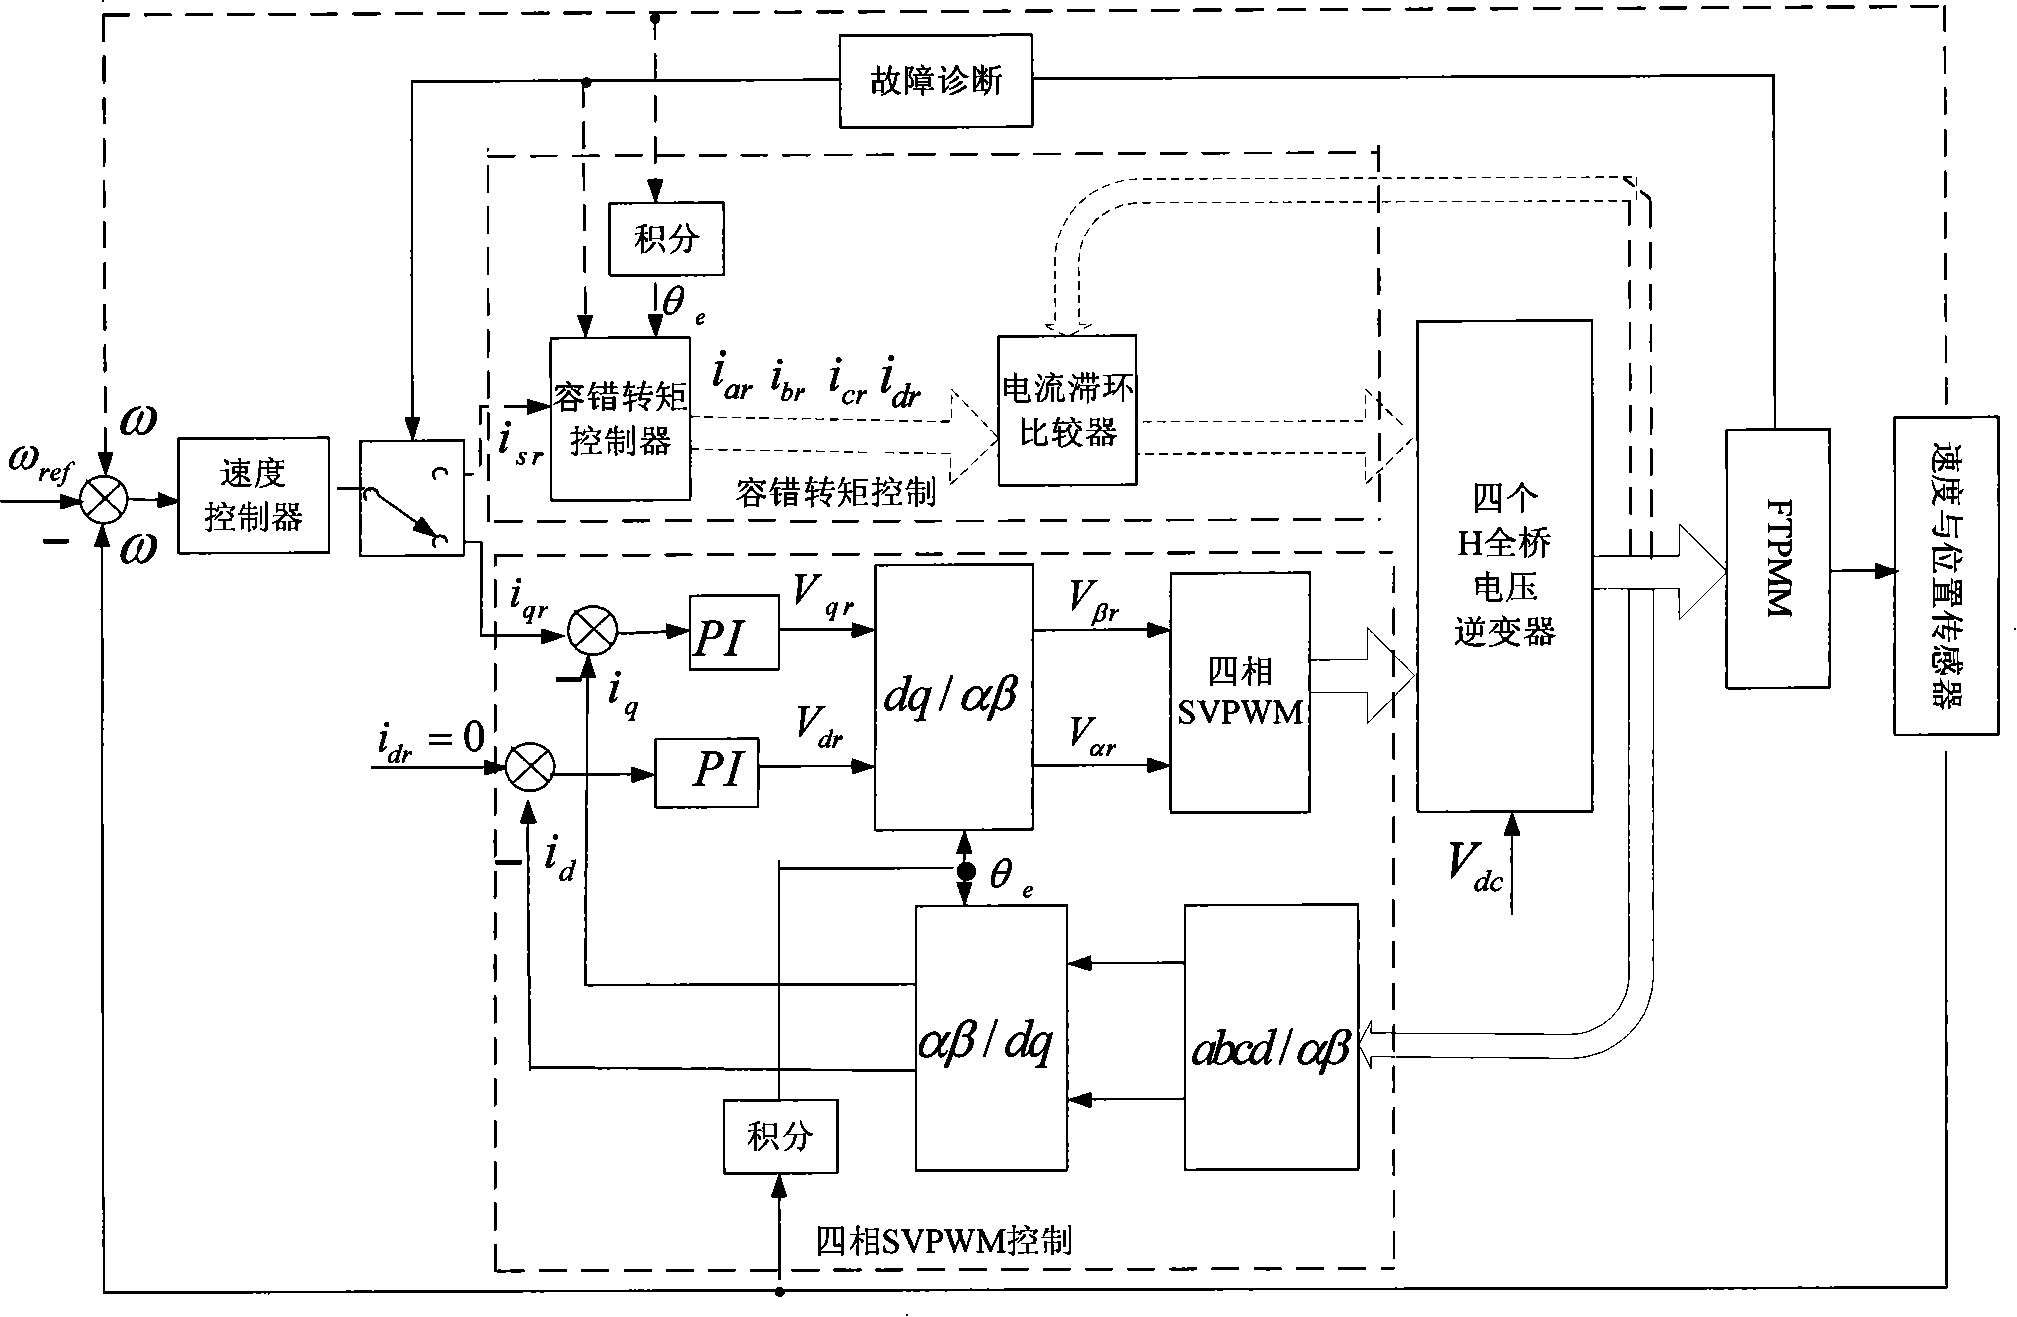 Controlling method of 4 phase permanent magnet fault tolerant motor